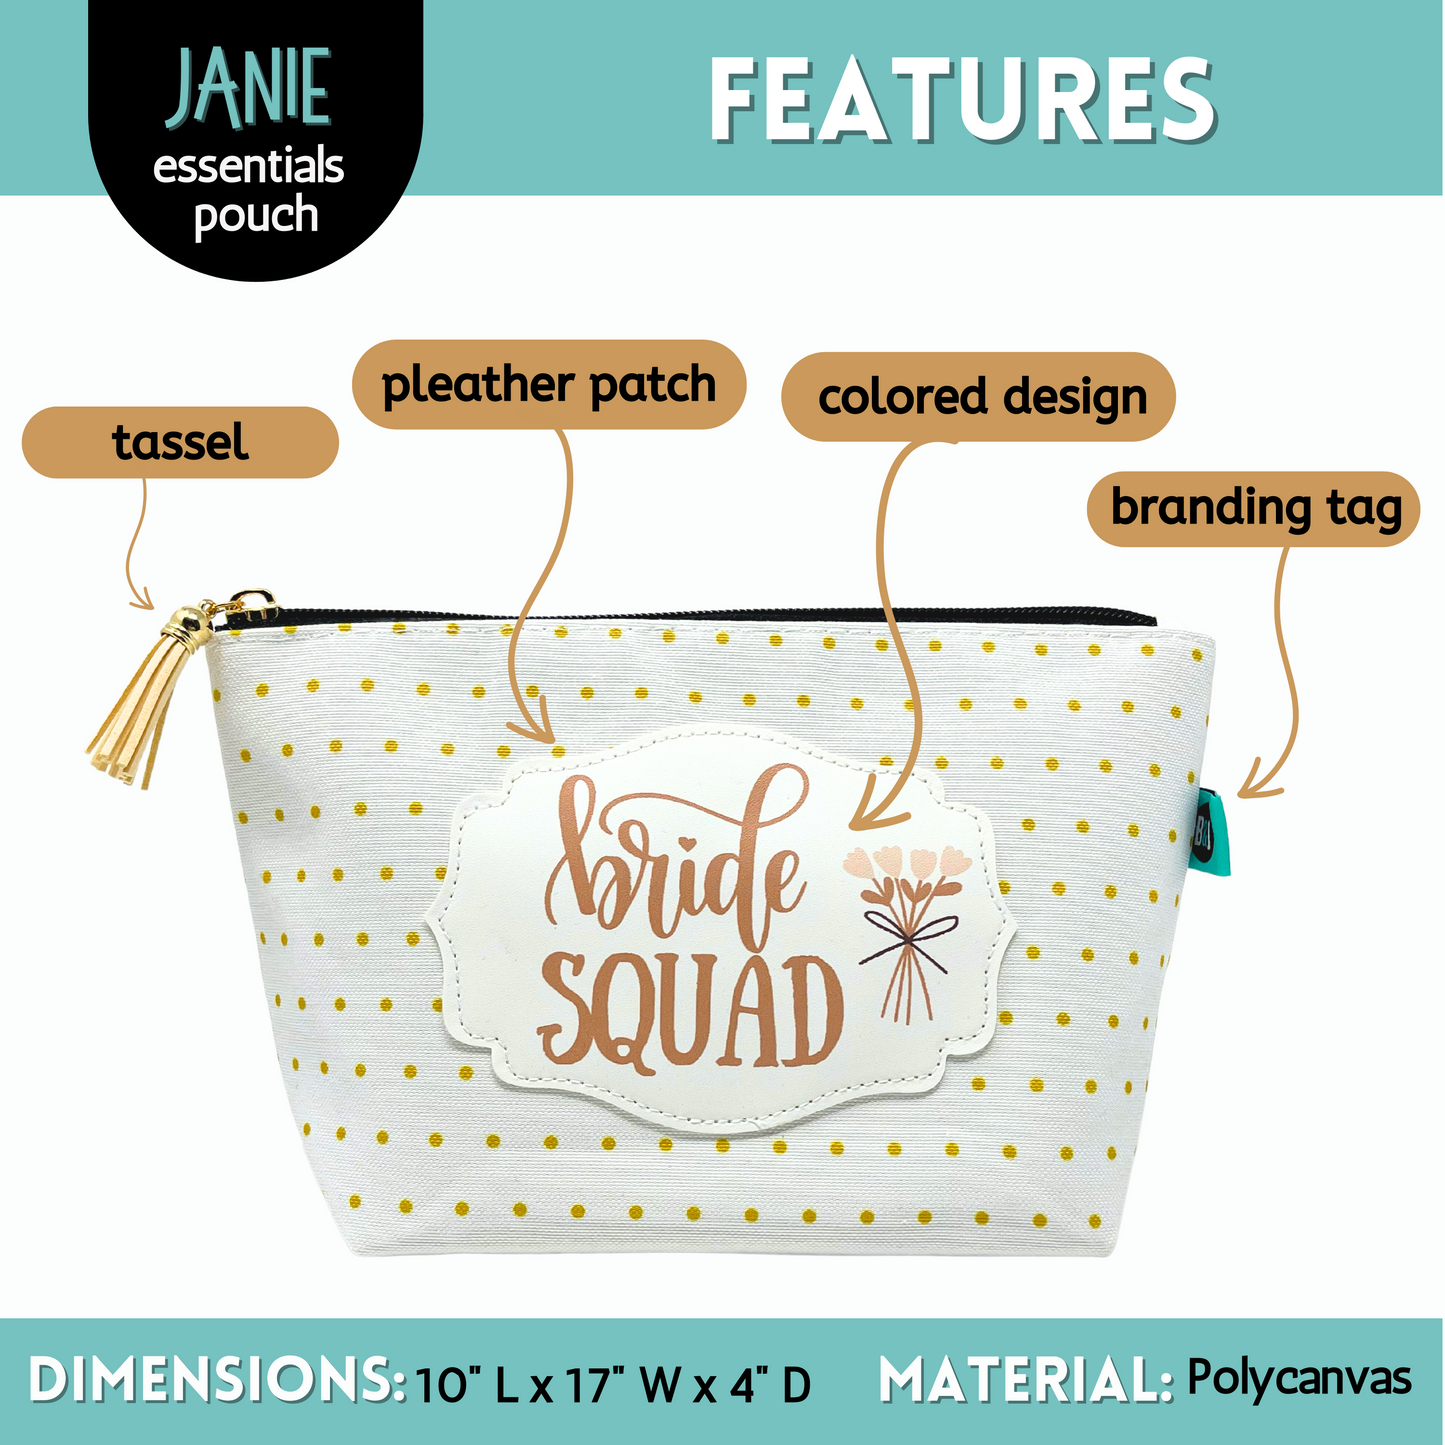 Bride Squad Gifts for Women Gold Dotted Janie Makeup Bags Cosmetic Bag Travel Toiletry Makeup Pouch Pencil Bag with Zipper Best Wedding Gifts